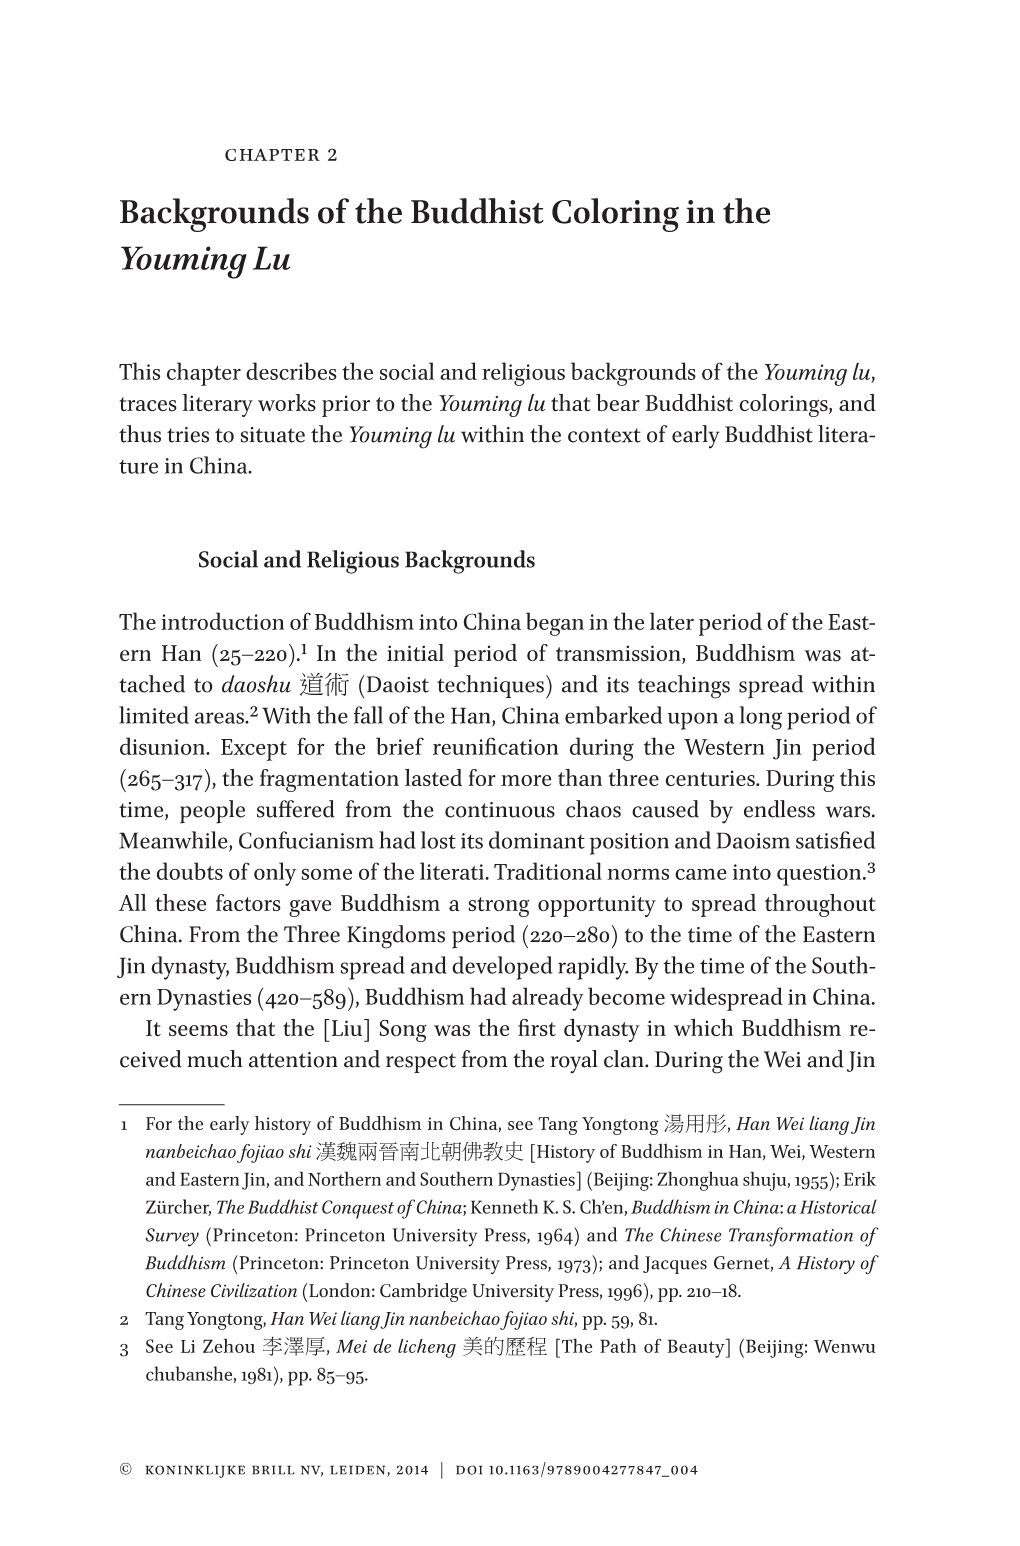 Backgrounds of the Buddhist Coloring in the Youming Lu 61